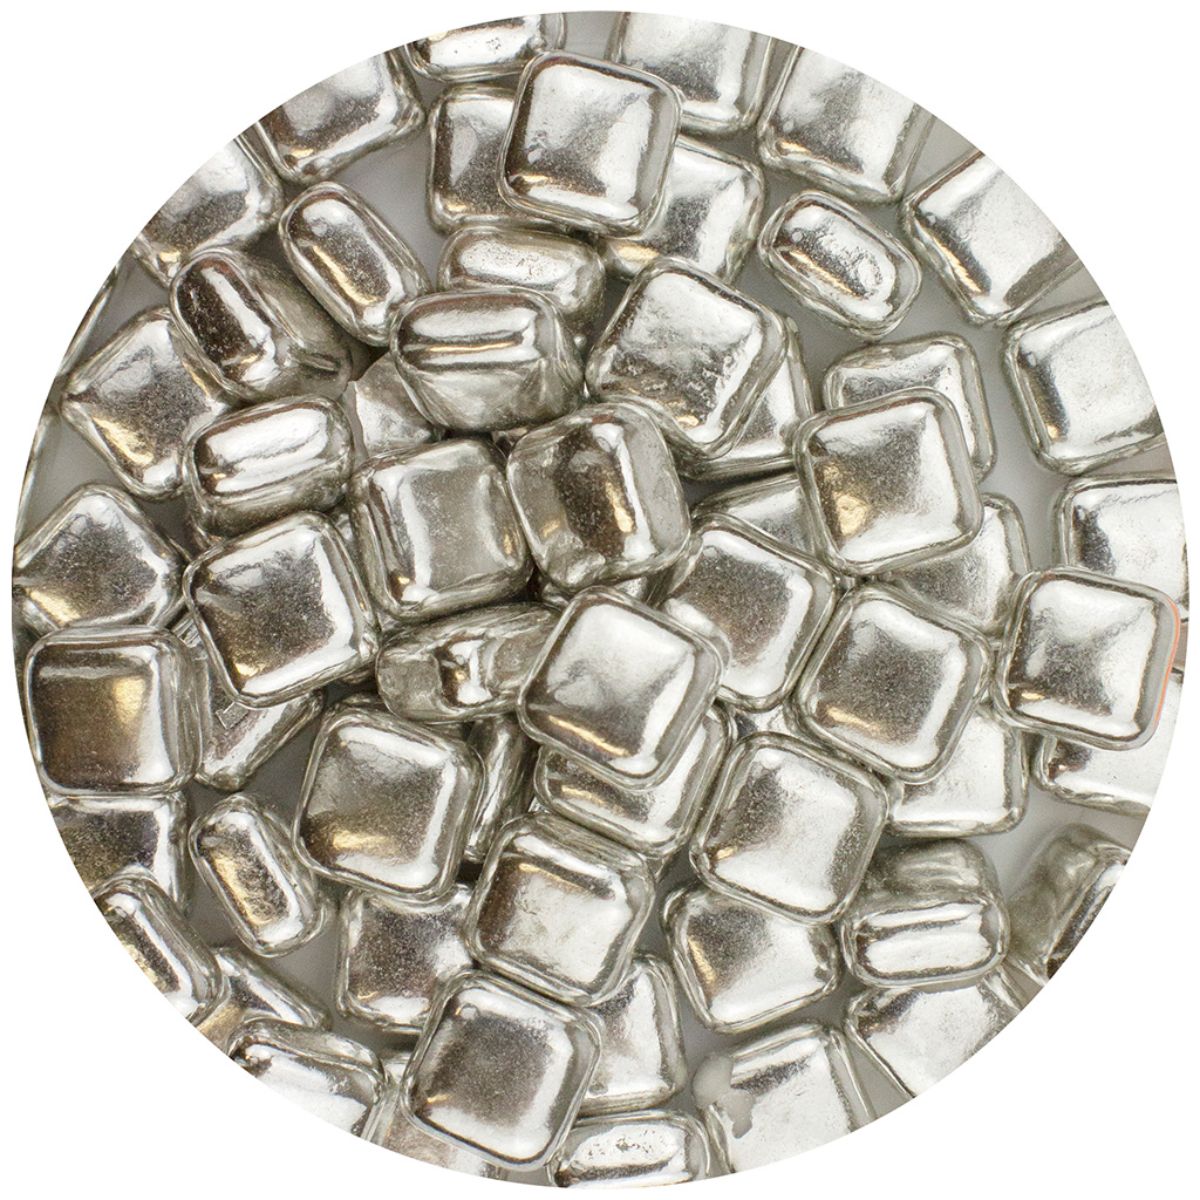 CK Dragees Silver Squares 3.7oz